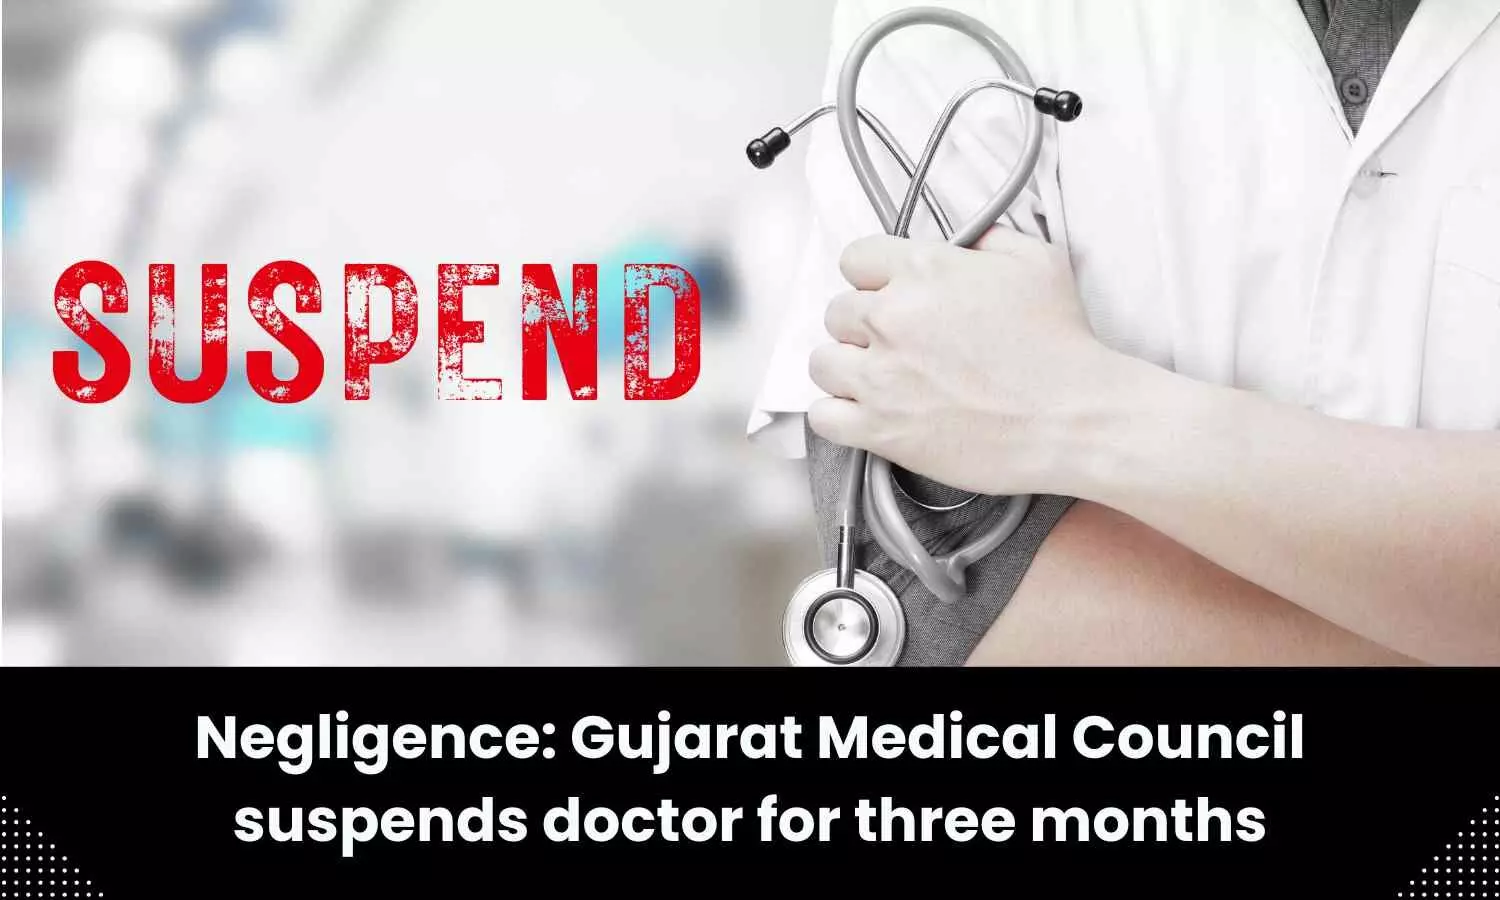 Negligence: Doctor suspended by Gujarat Medical Council for 3 months